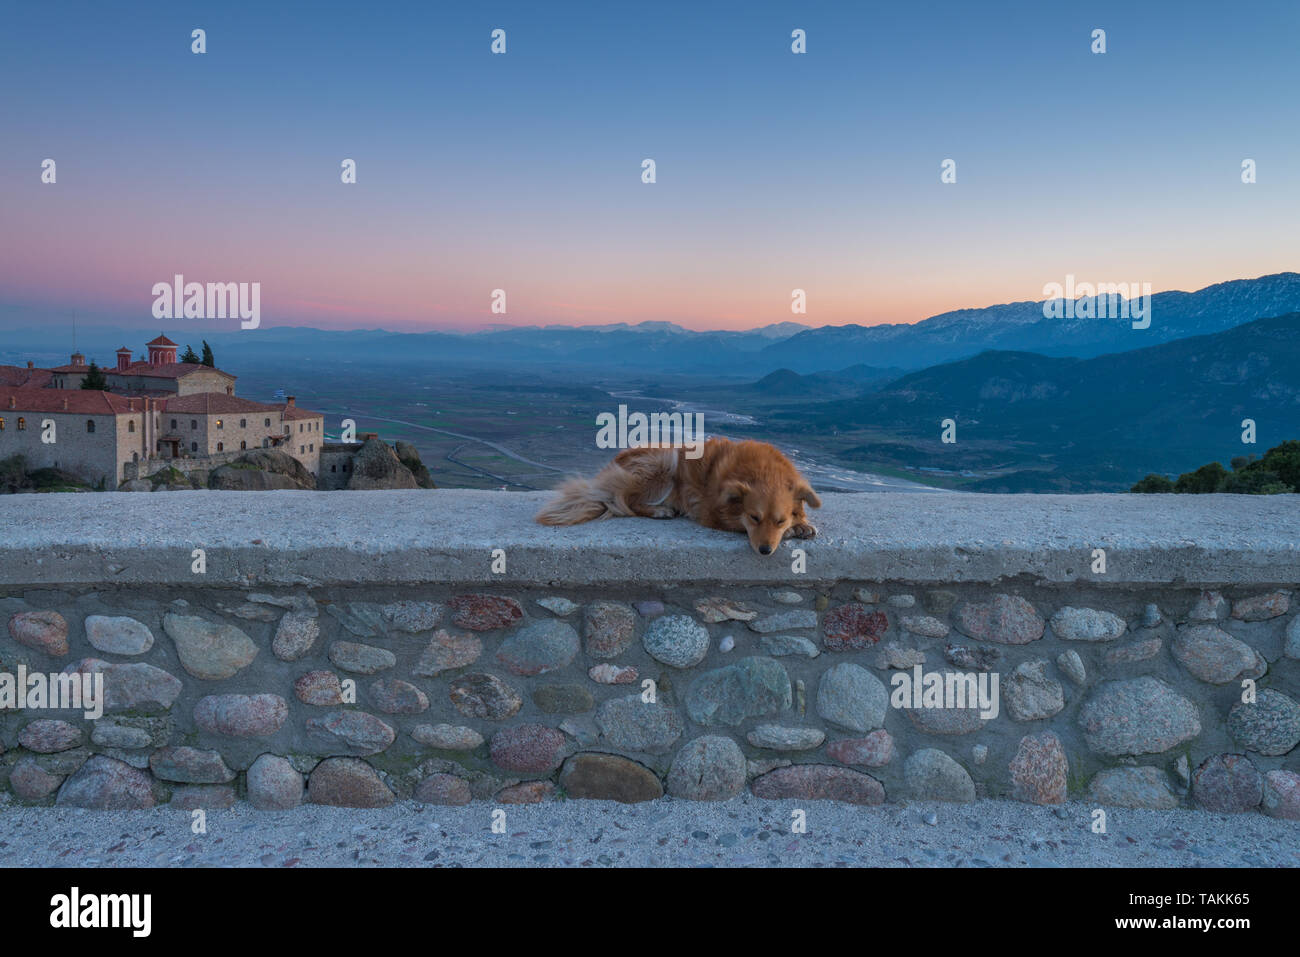 A lone, solitary dog is sleeping on a stone wall above St. Nicholas monastery in Meteora. Cuddled, friendly, sleeping dog at sunset in Greece. Stock Photo